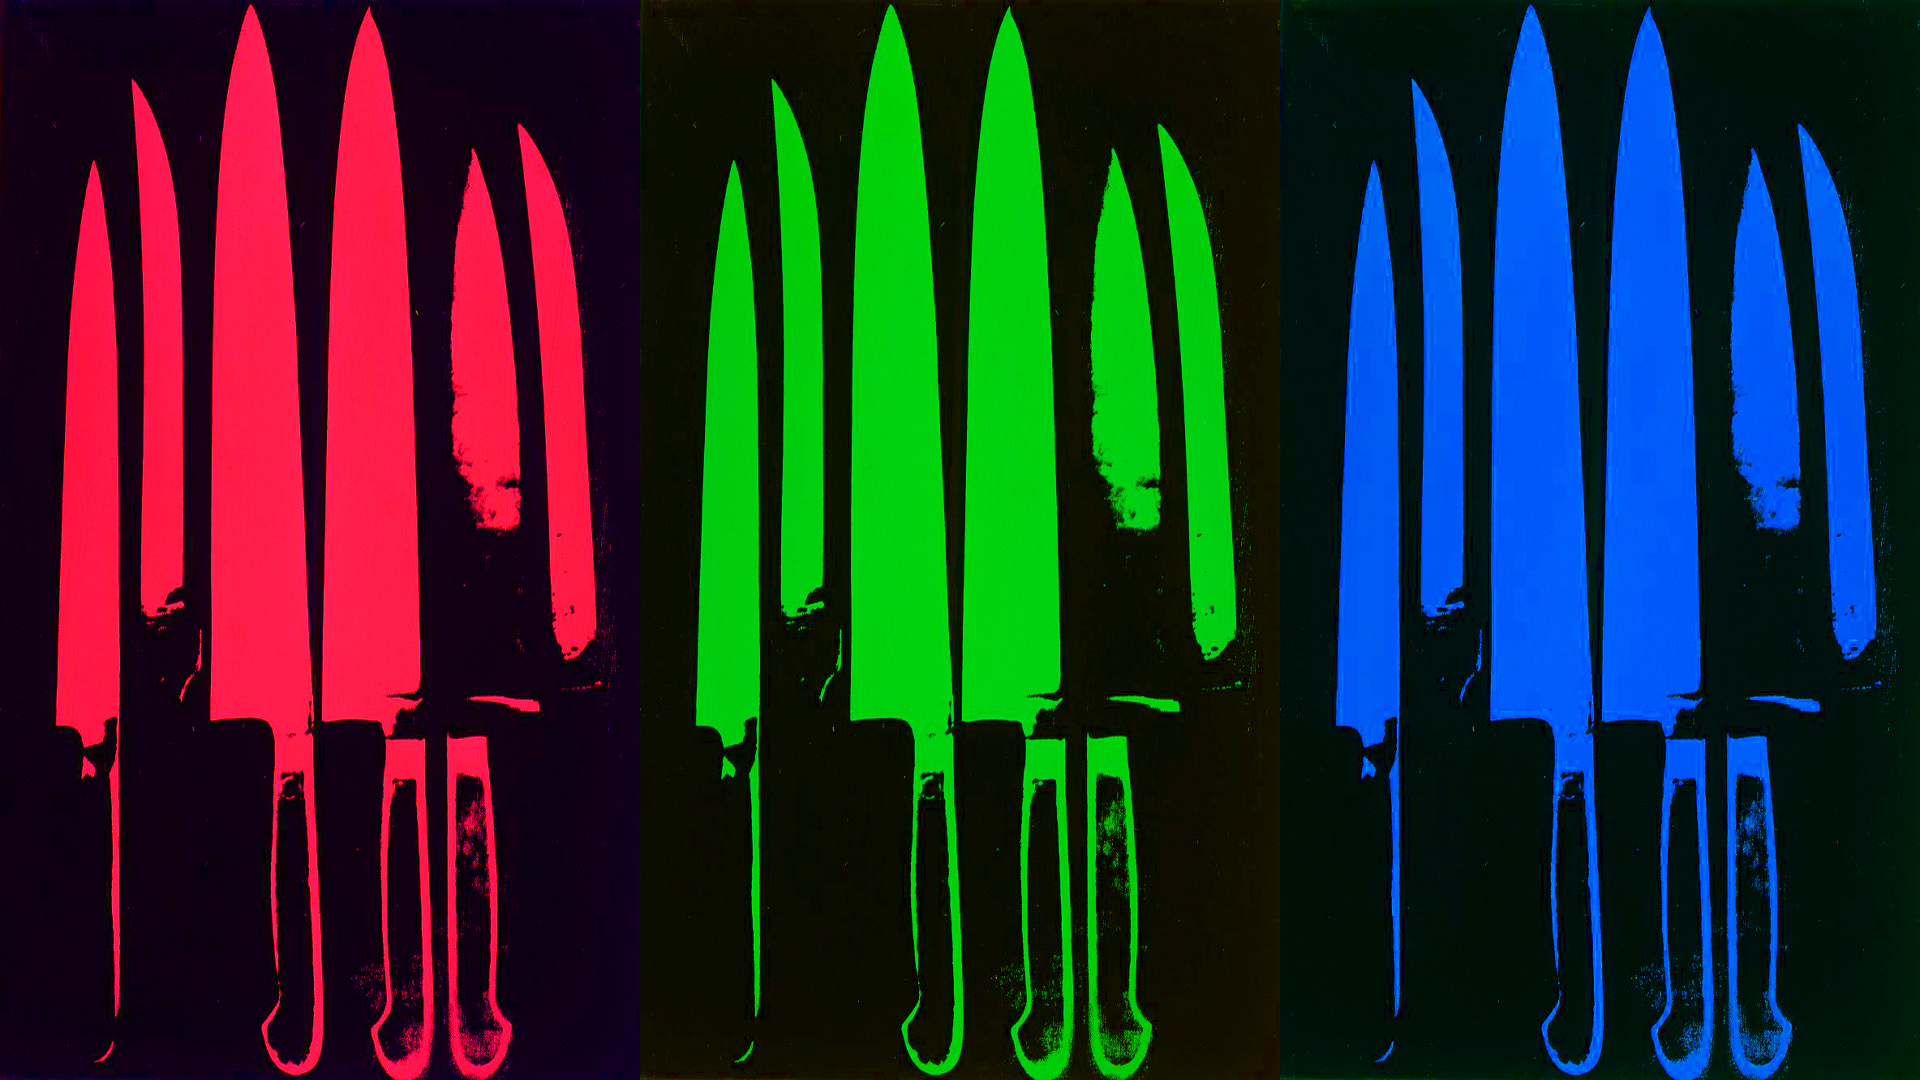 Free Download The Andy Warhol Knives Wallpaper Andy Warhol Knives Iphone Wallpaper 19x1080 For Your Desktop Mobile Tablet Explore 47 Knife Wallpapers Cs Go Knife Wallpaper